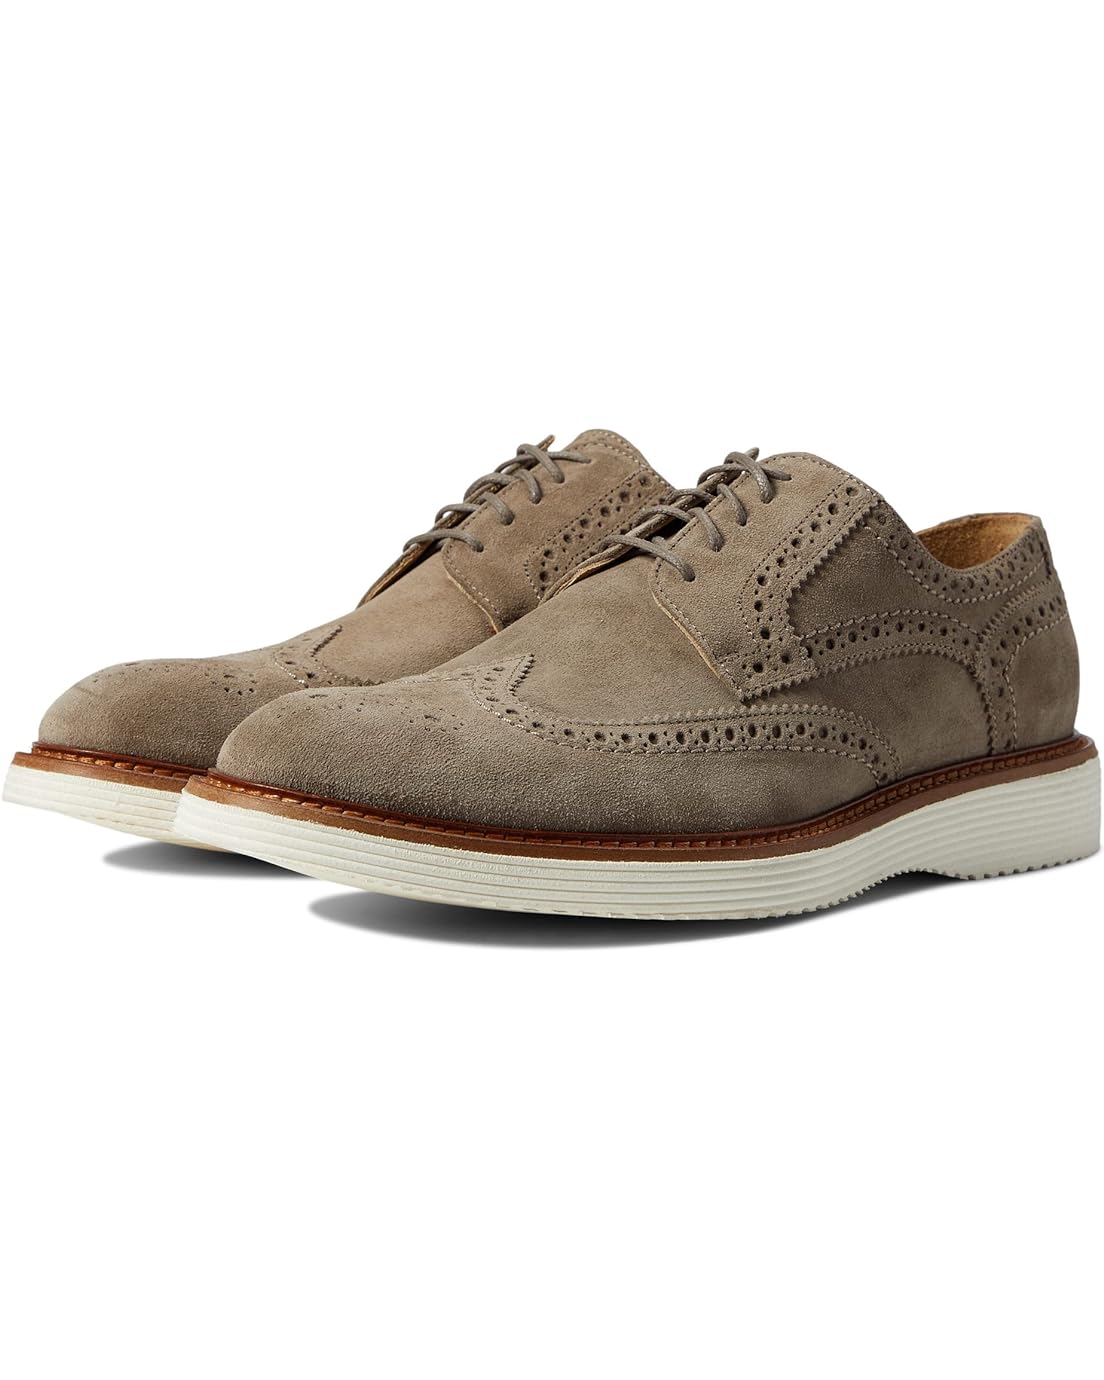 Johnston & Murphy Collection Jameson Short Wing Tip